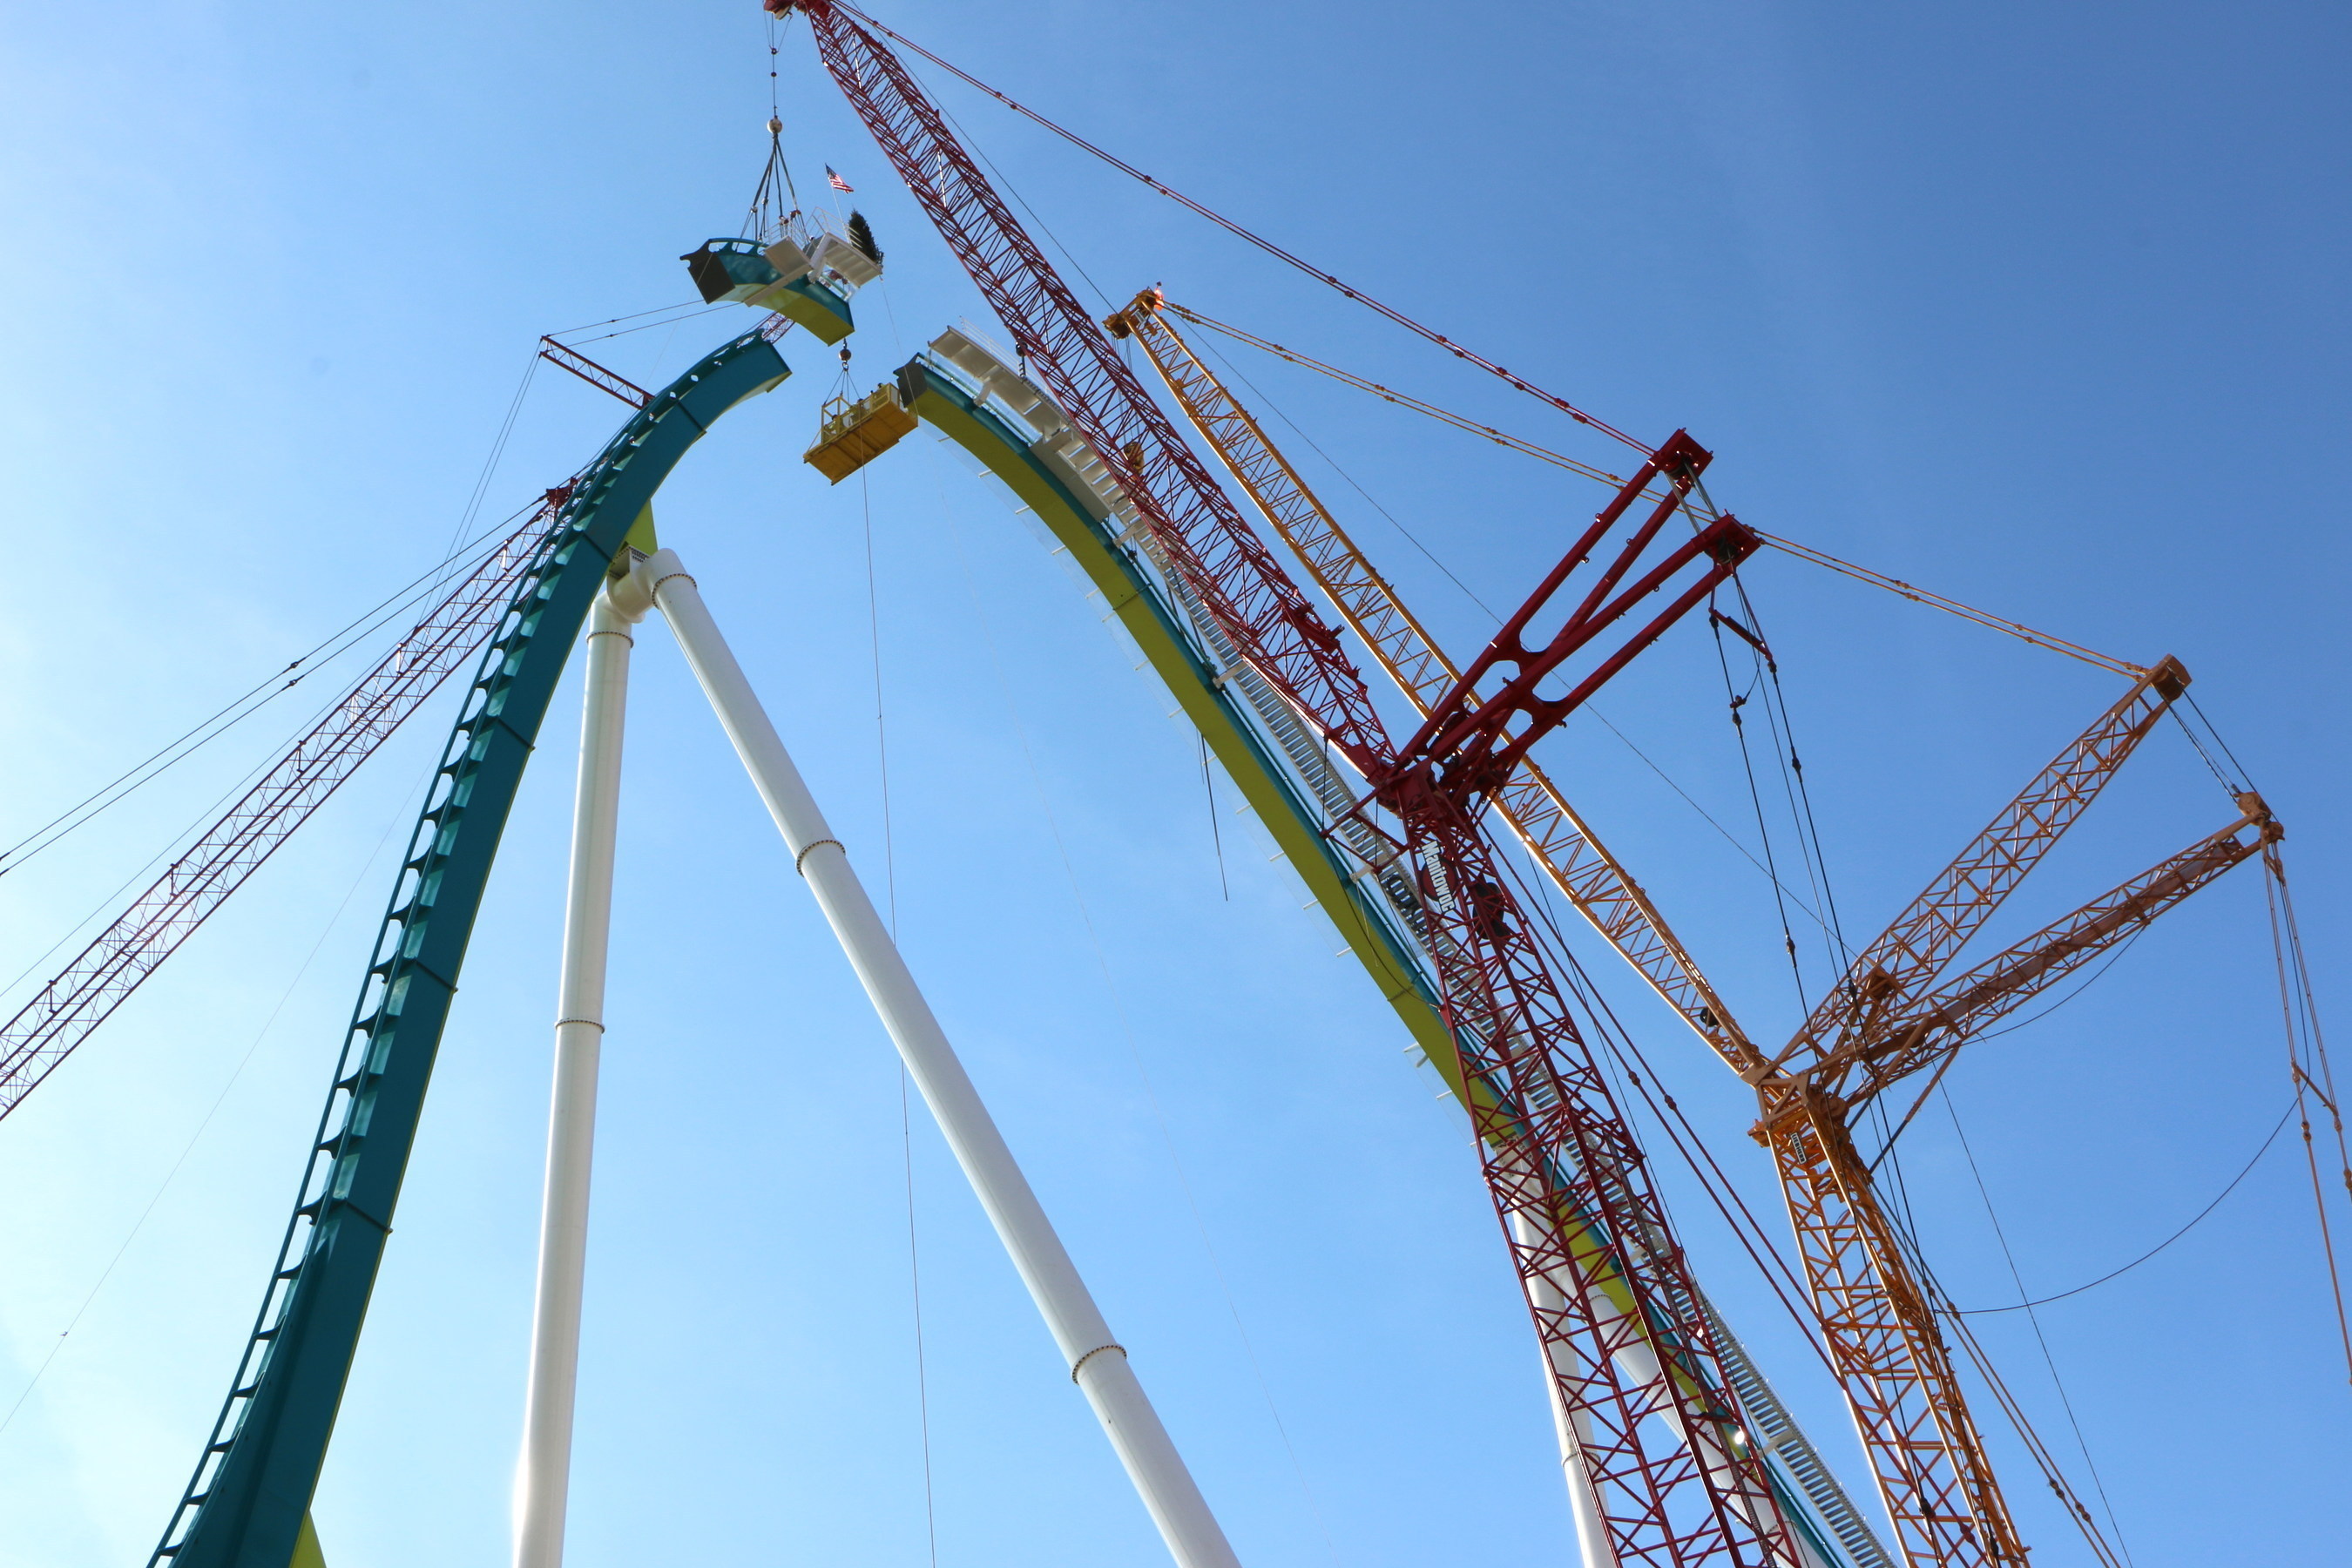 Crews hoist the last piece of the Fury 325 lift hill into place at Carowinds in Charlotte, NC at 325 feet tall. Debuting in Spring 2015, Fury 325 will be the world's tallest and fastest giga coaster.